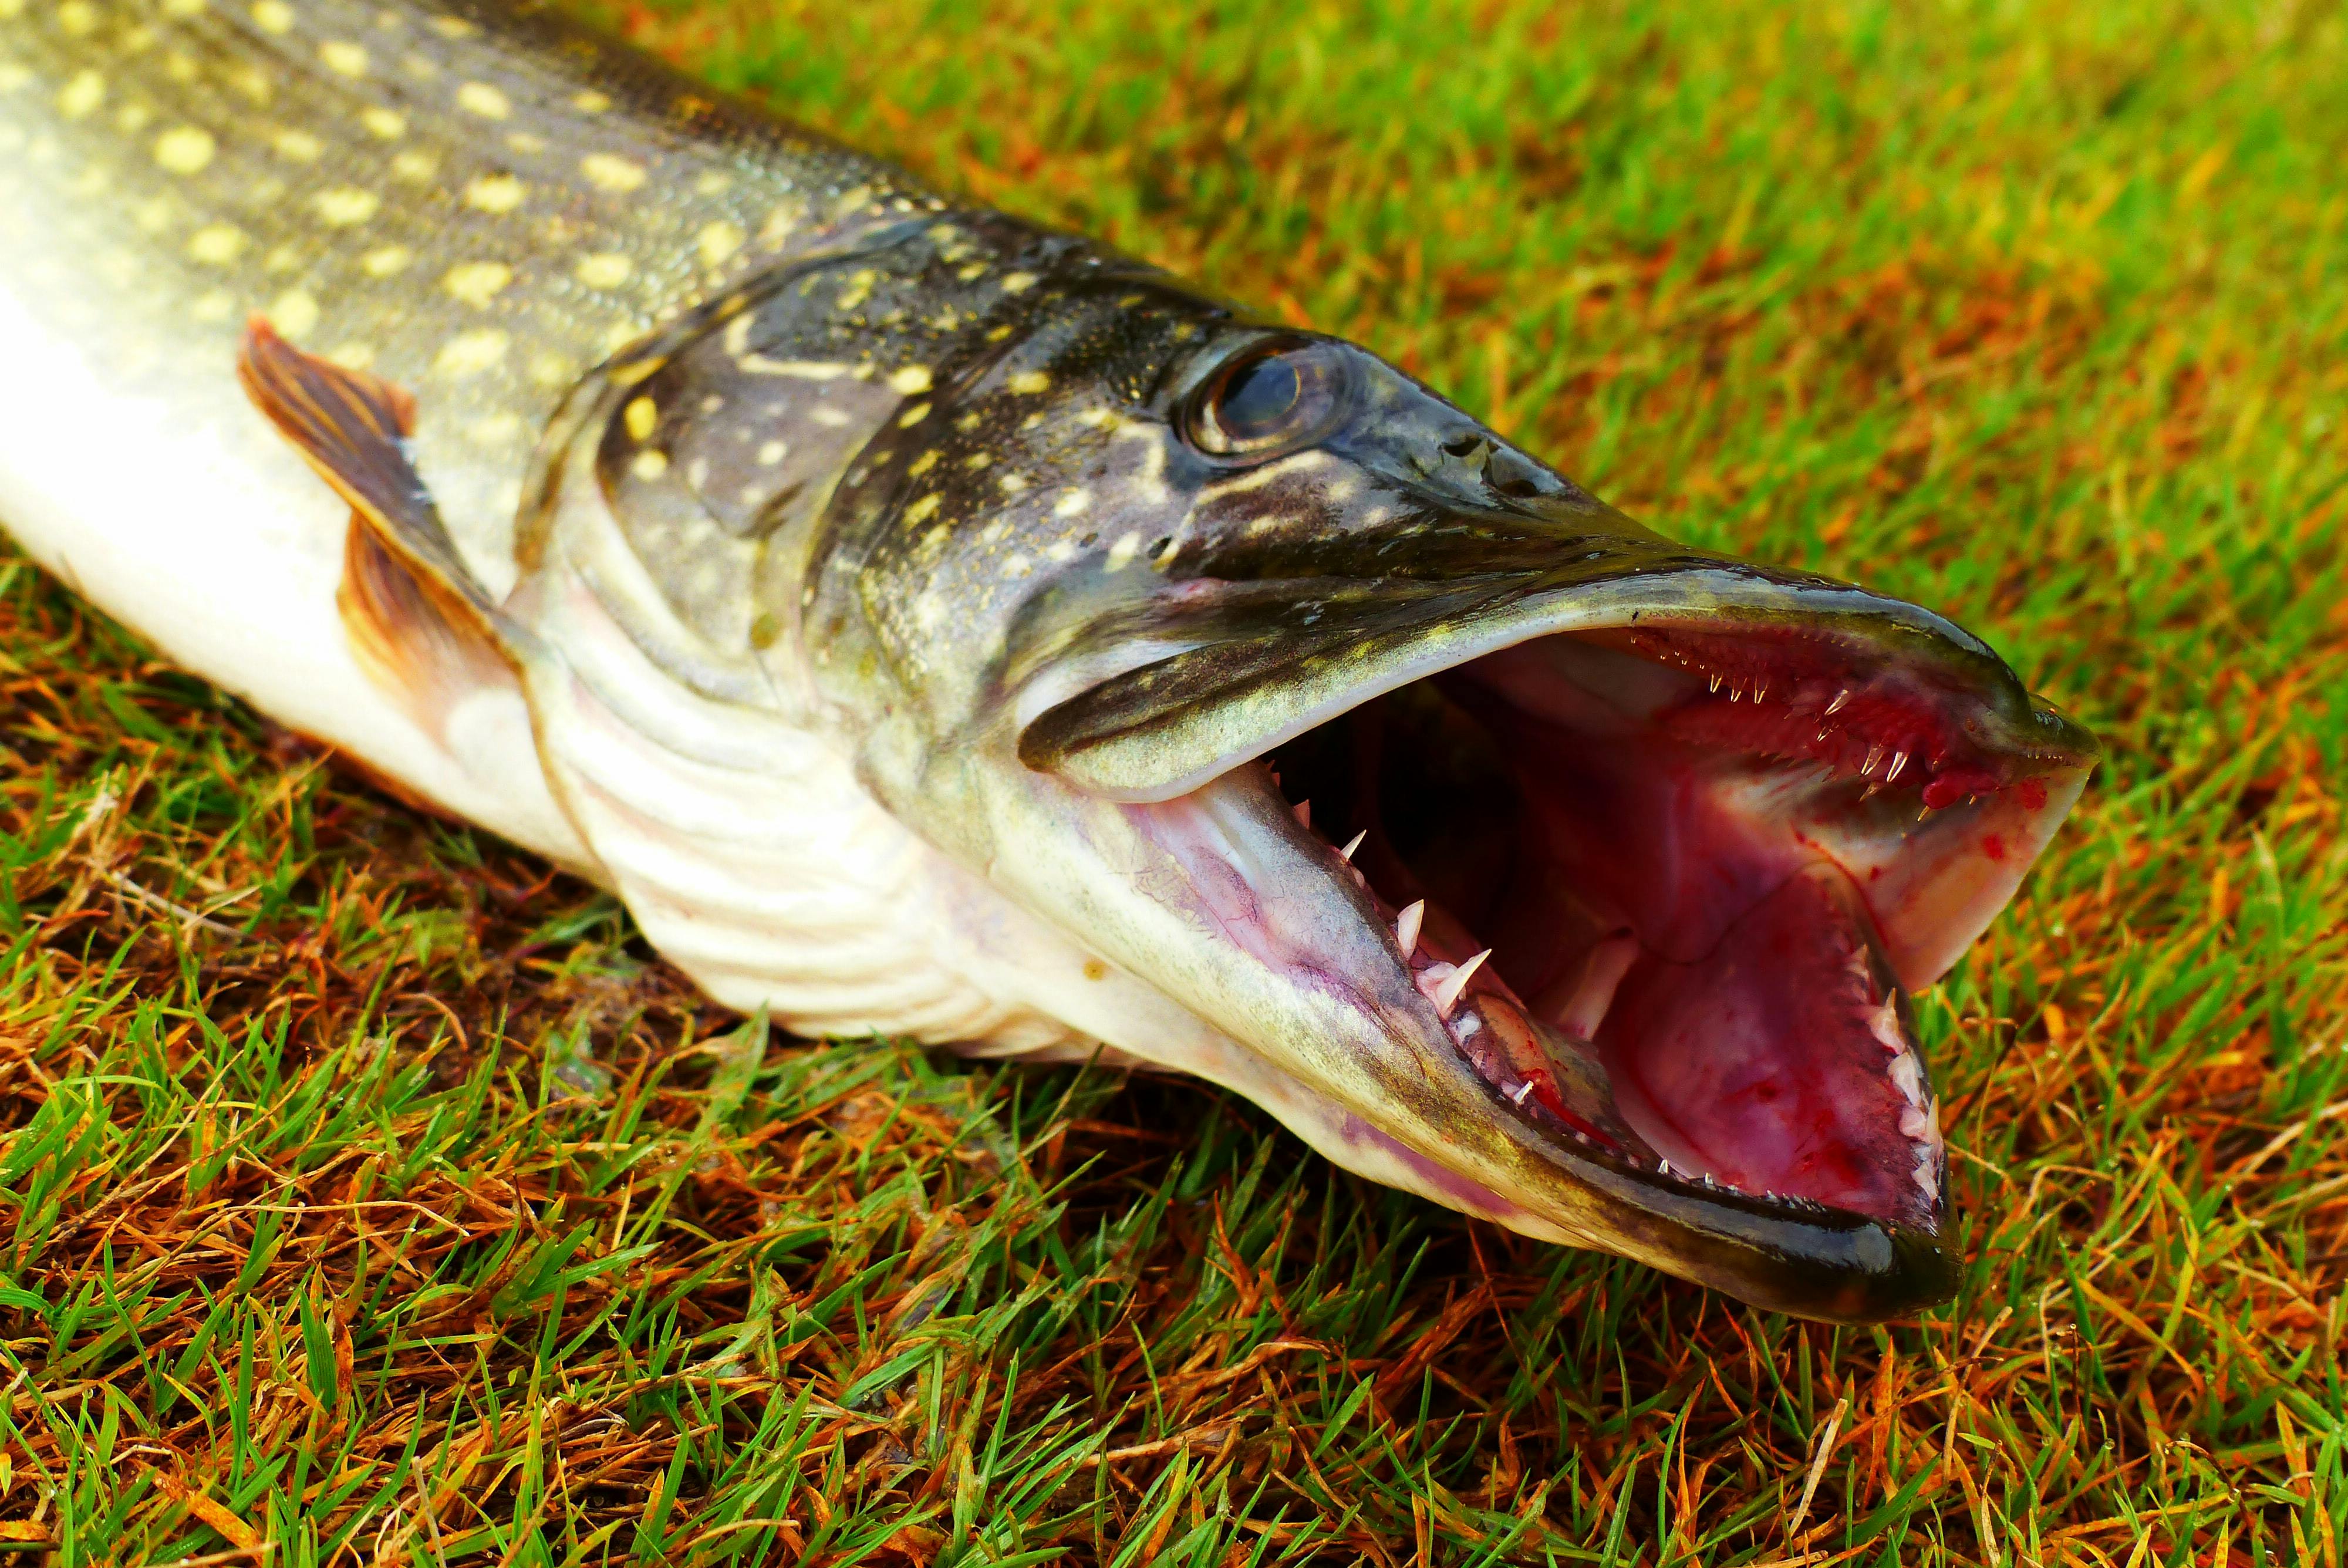 A Northern Pike lying on the grass.